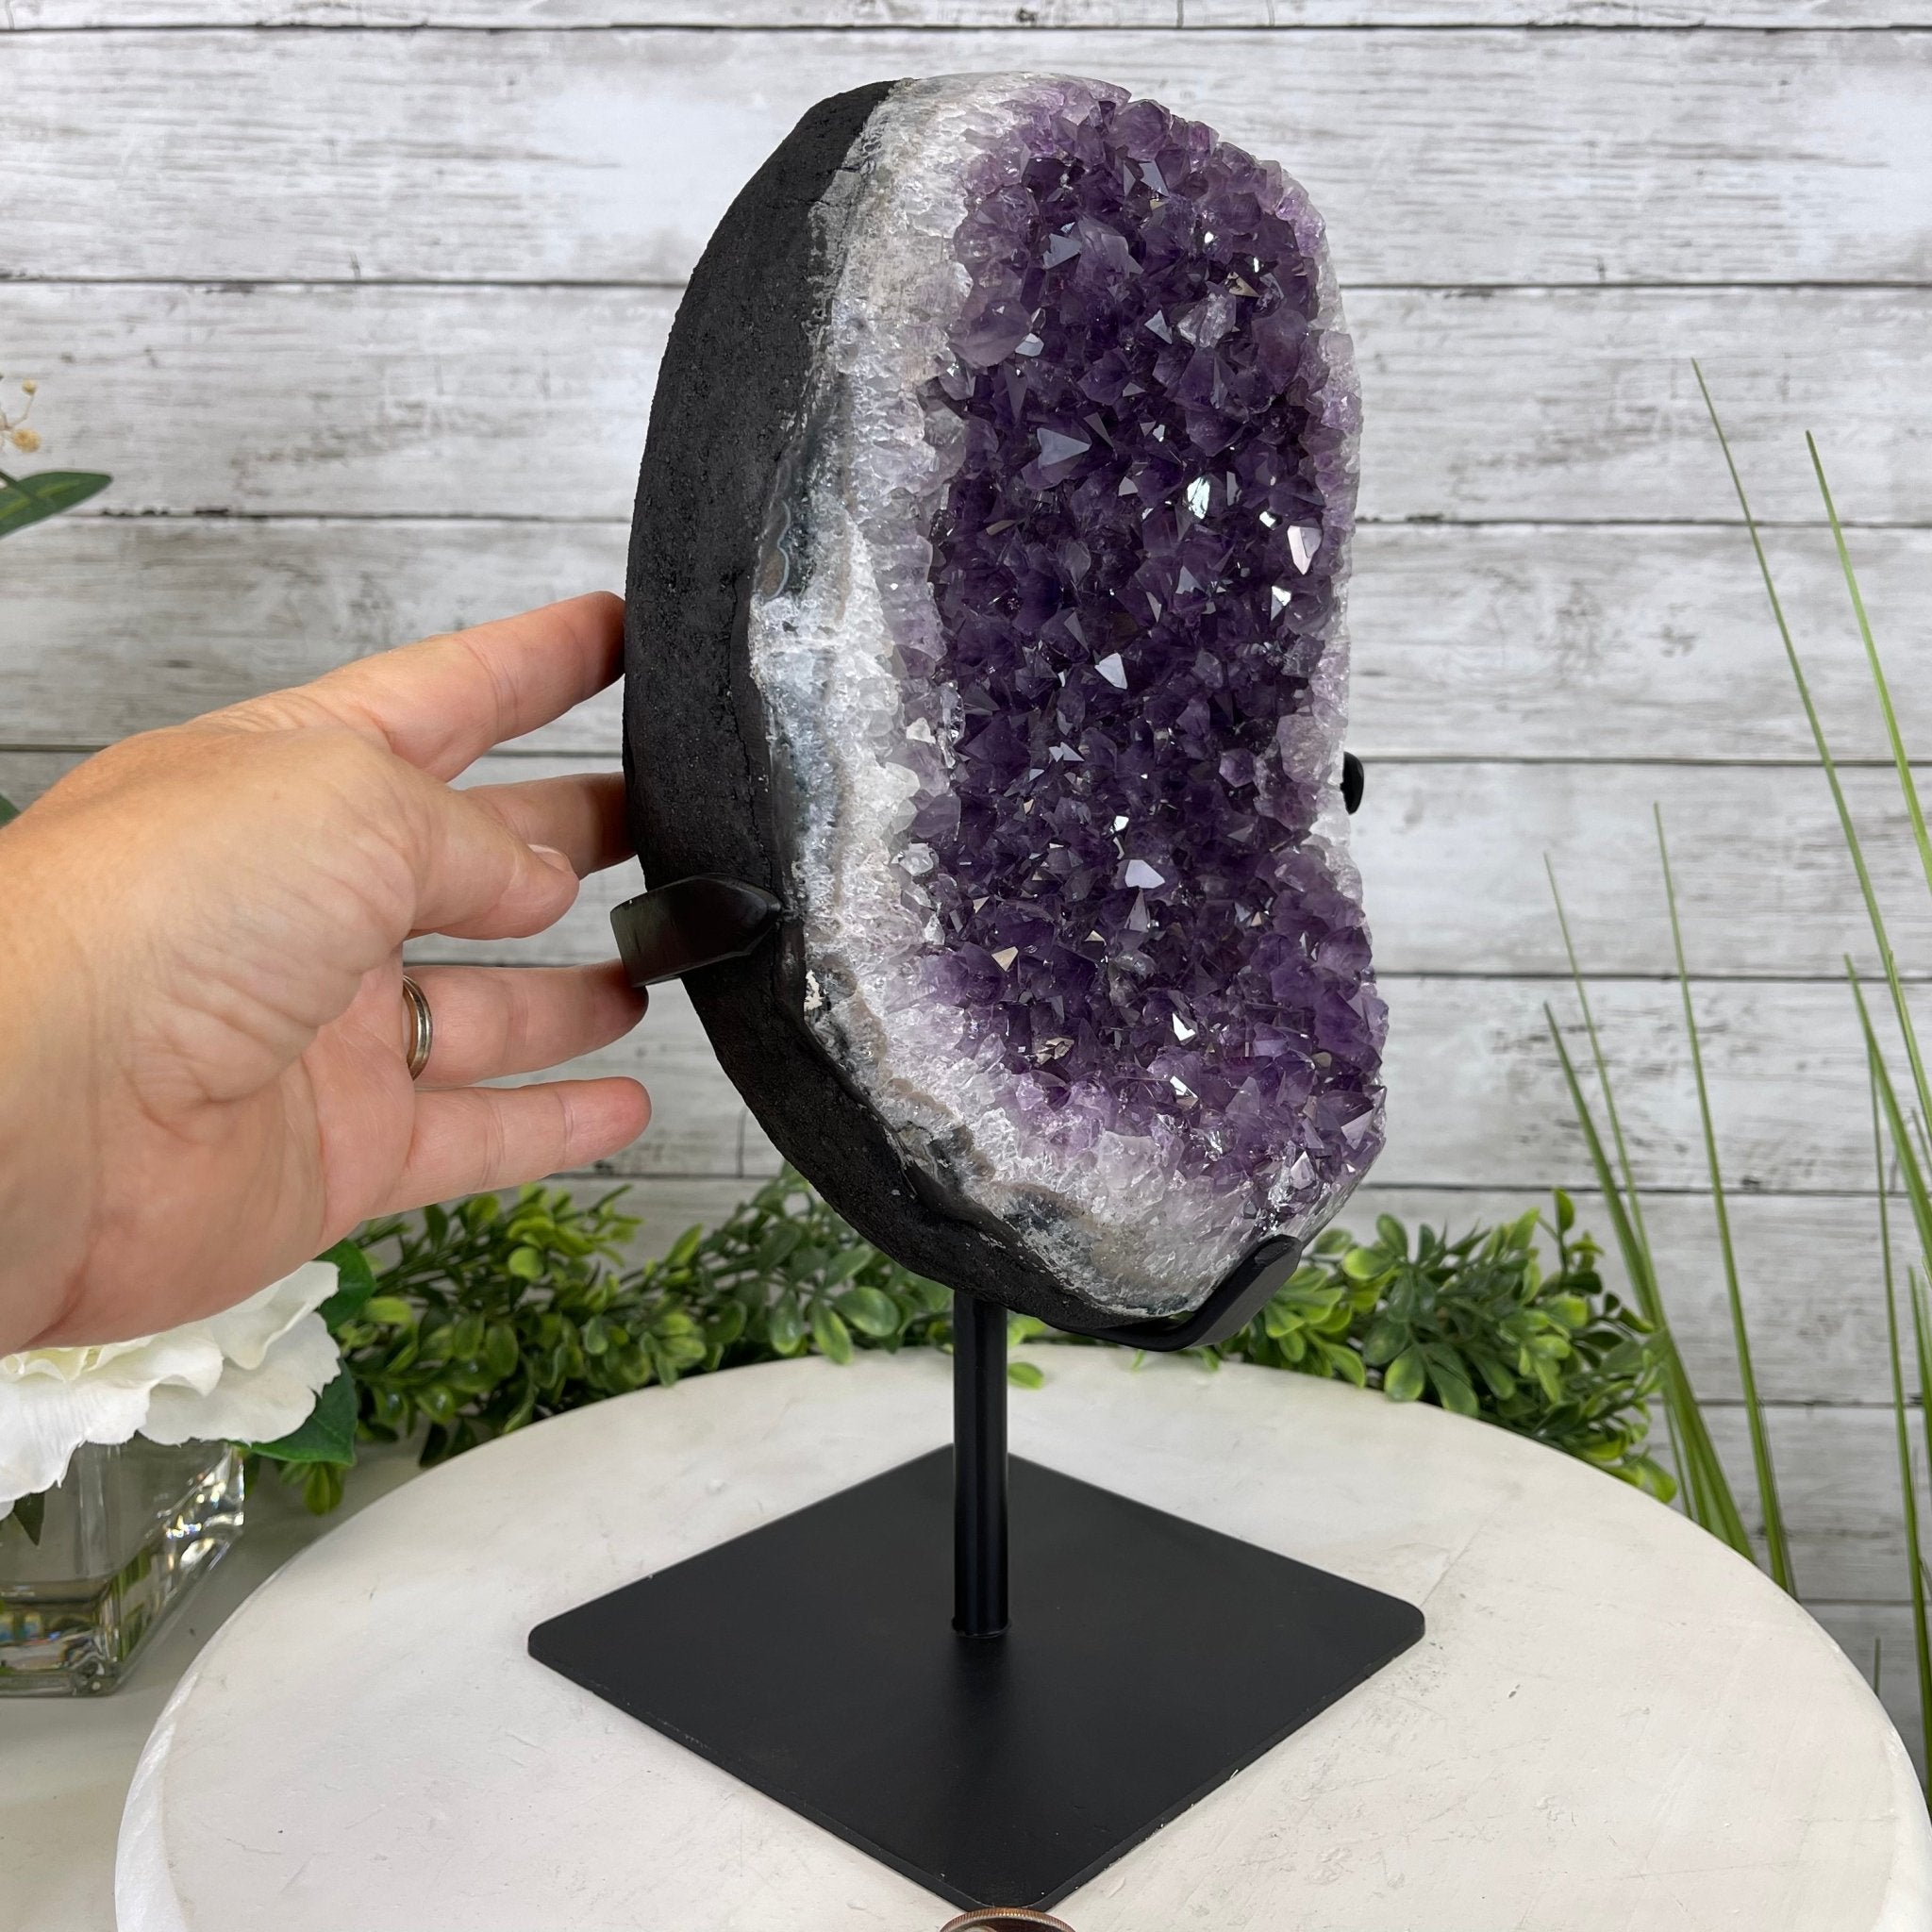 Extra Plus Quality Amethyst Druse Cluster on Metal Stand, 16.7 lbs & 12.9" tall #5491-0040 by Brazil Gems - Brazil GemsBrazil GemsExtra Plus Quality Amethyst Druse Cluster on Metal Stand, 16.7 lbs & 12.9" tall #5491-0040 by Brazil GemsClusters on Fixed Bases5491-0040